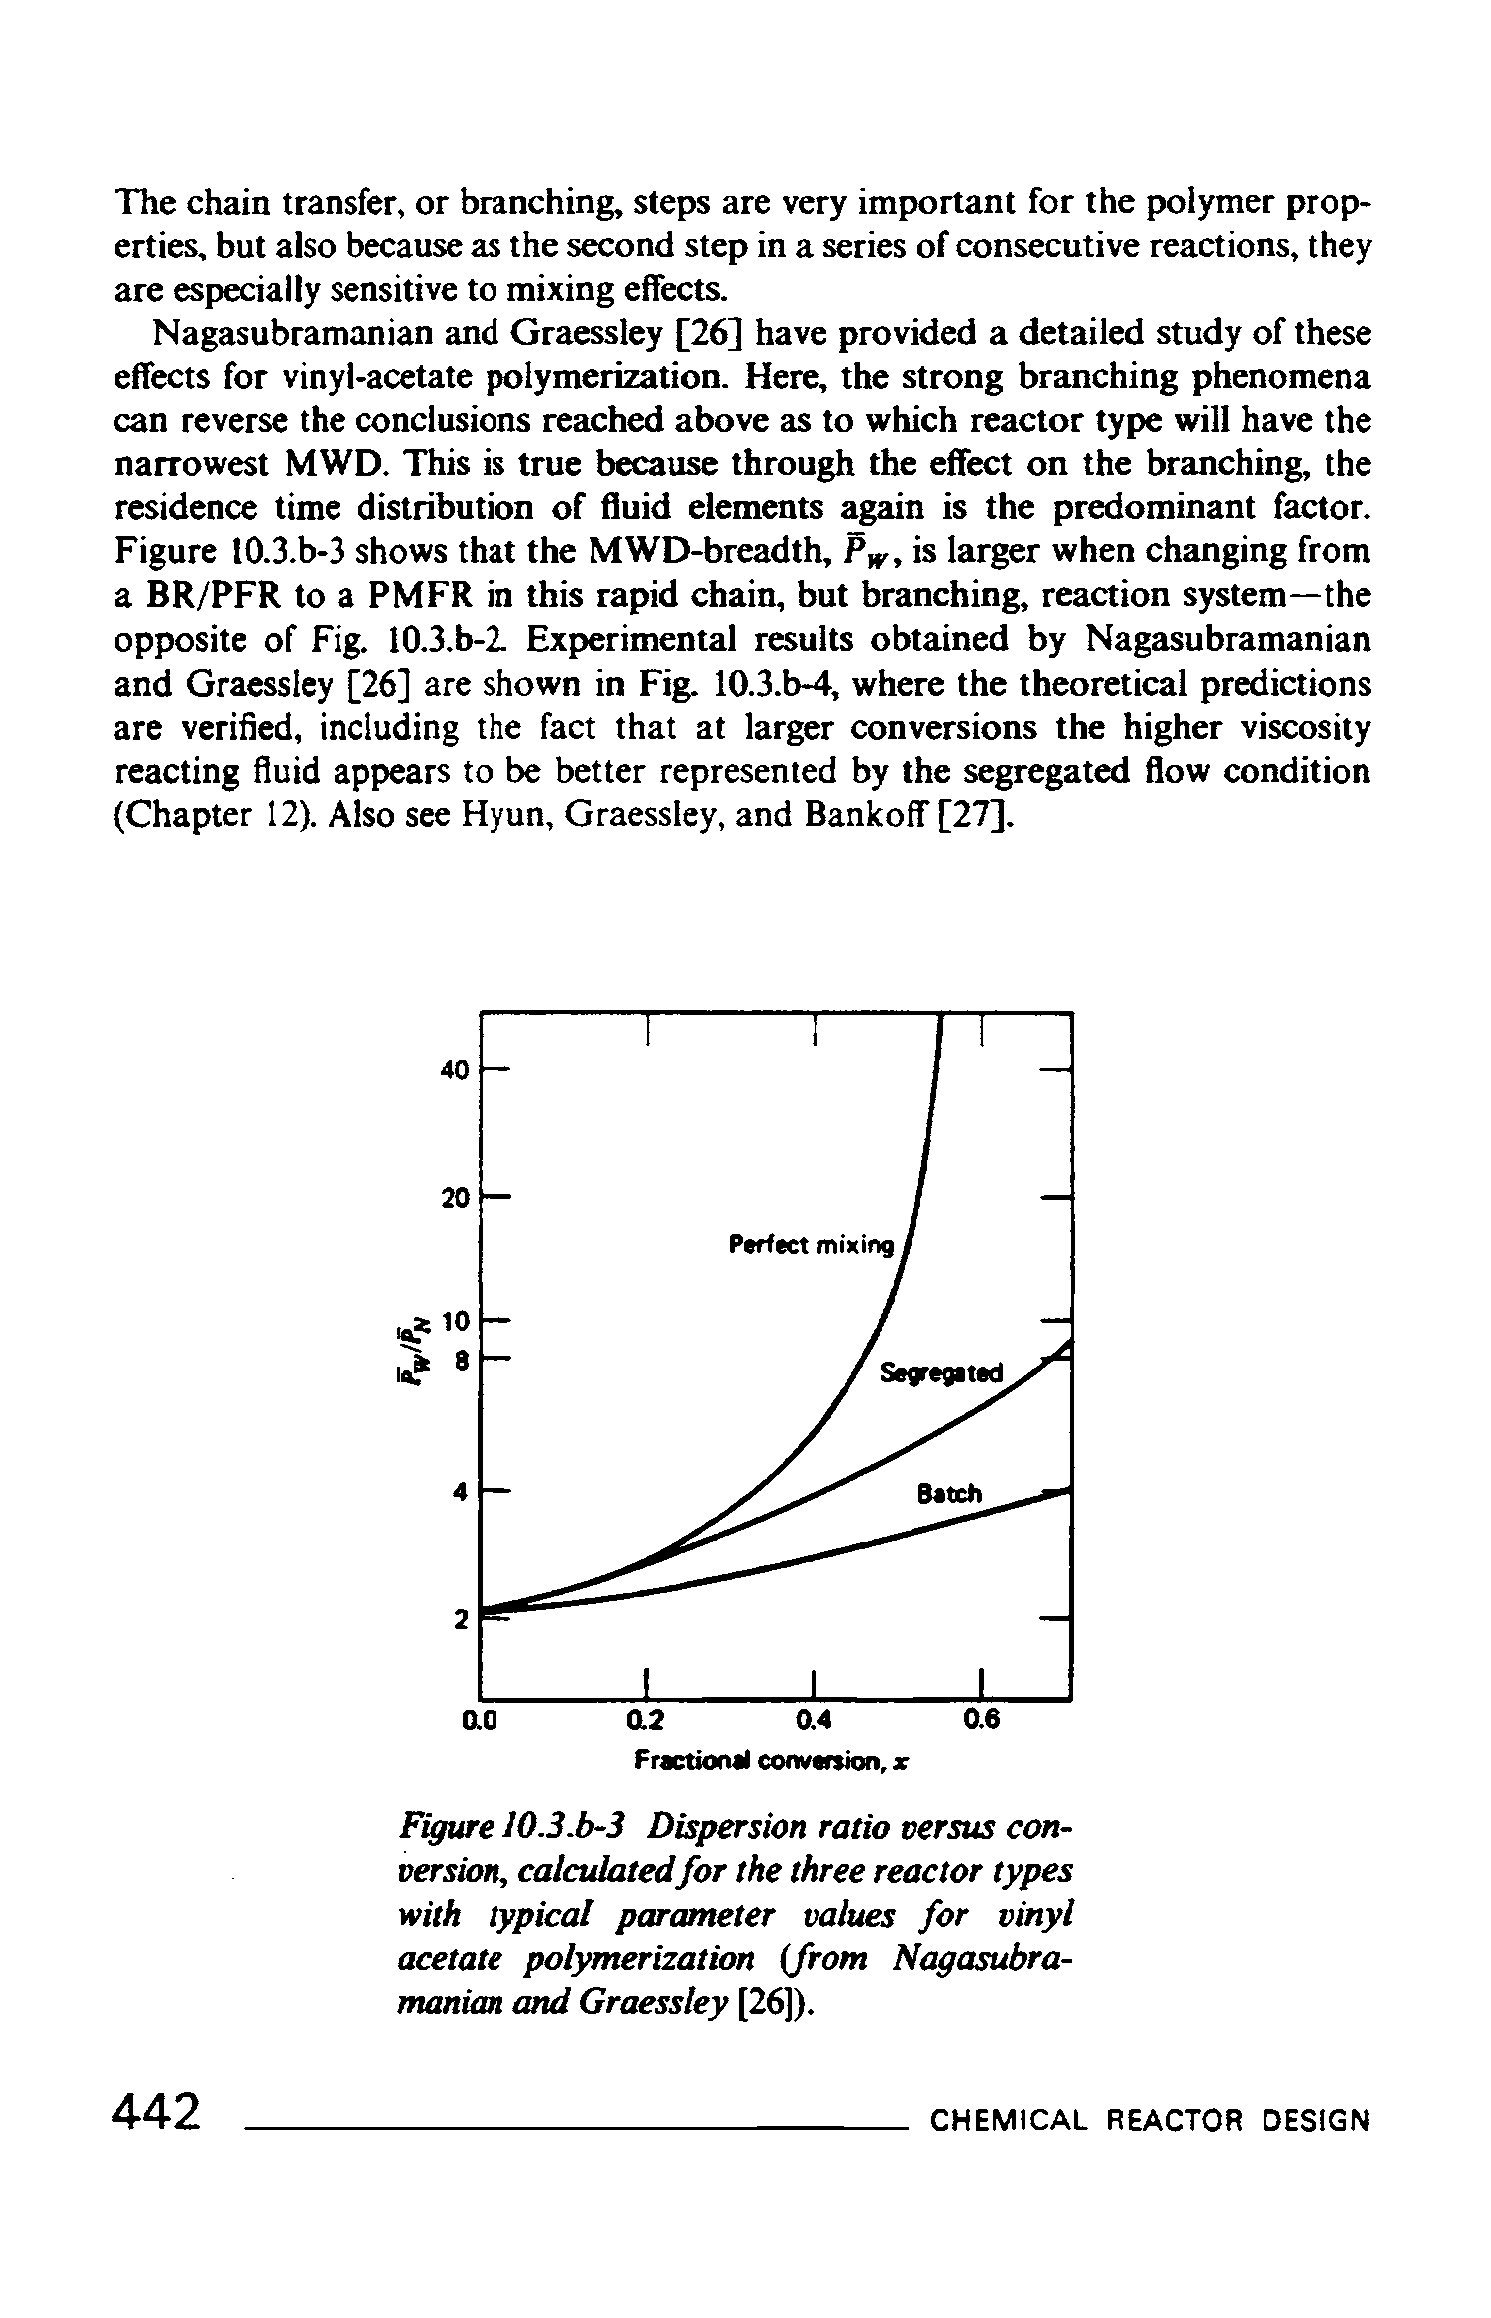 Figure 10.3 J>-3 Dispersion ratio versus con-versUm, calculated for the three reactor types with typical parameter values for vinyl acetate polymerization (from Nagasidtra-manian and Graessley [26]).